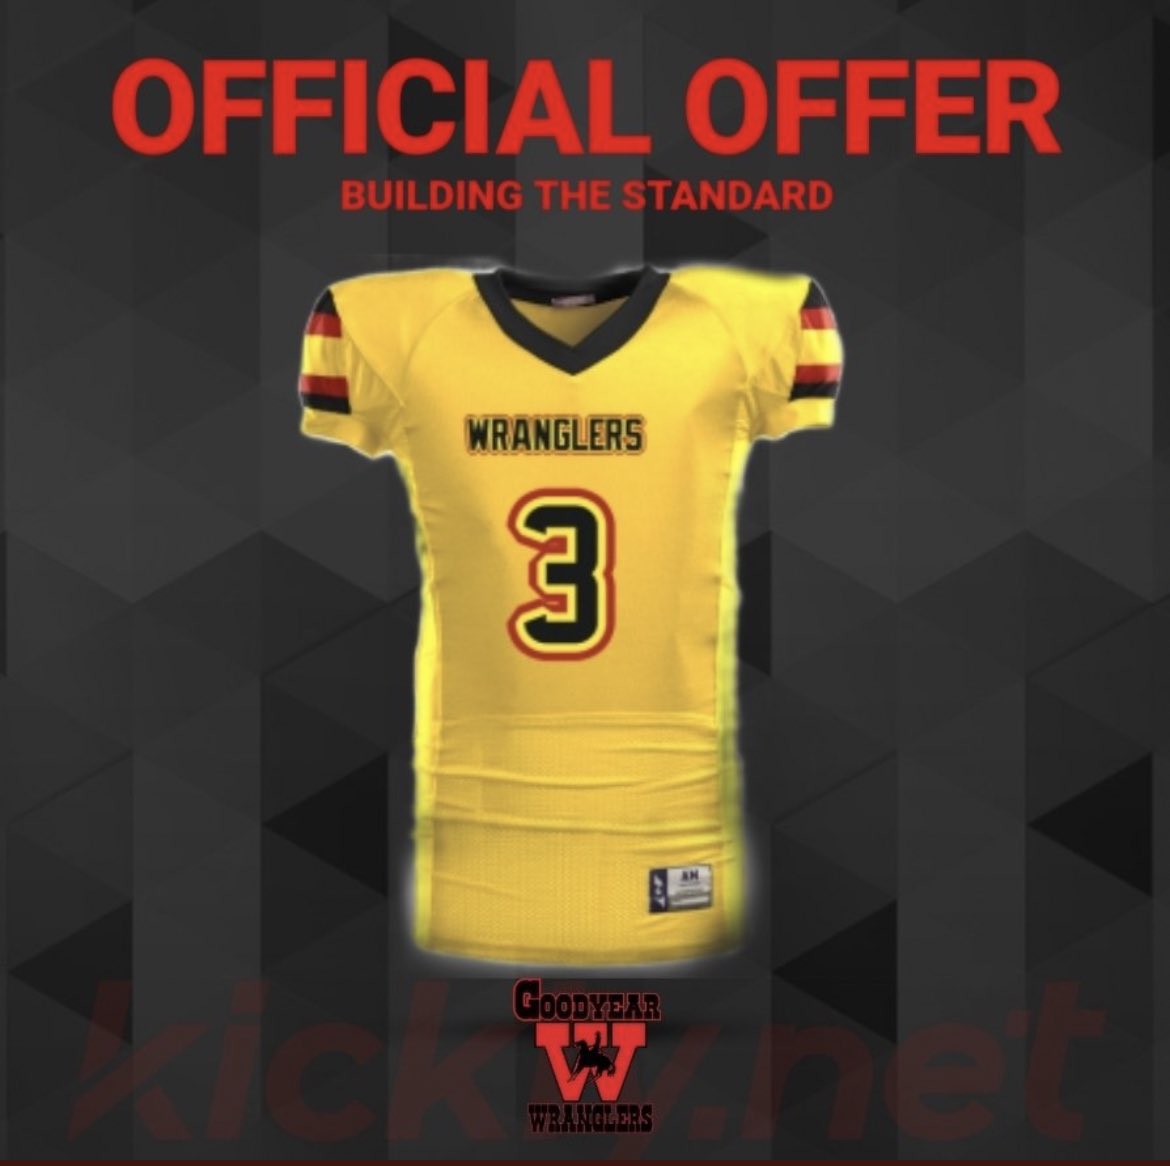 After a great conversation with @CoachFunch I am extremely blessed to have received an offer to @GY_WRANGLERS @komet_football